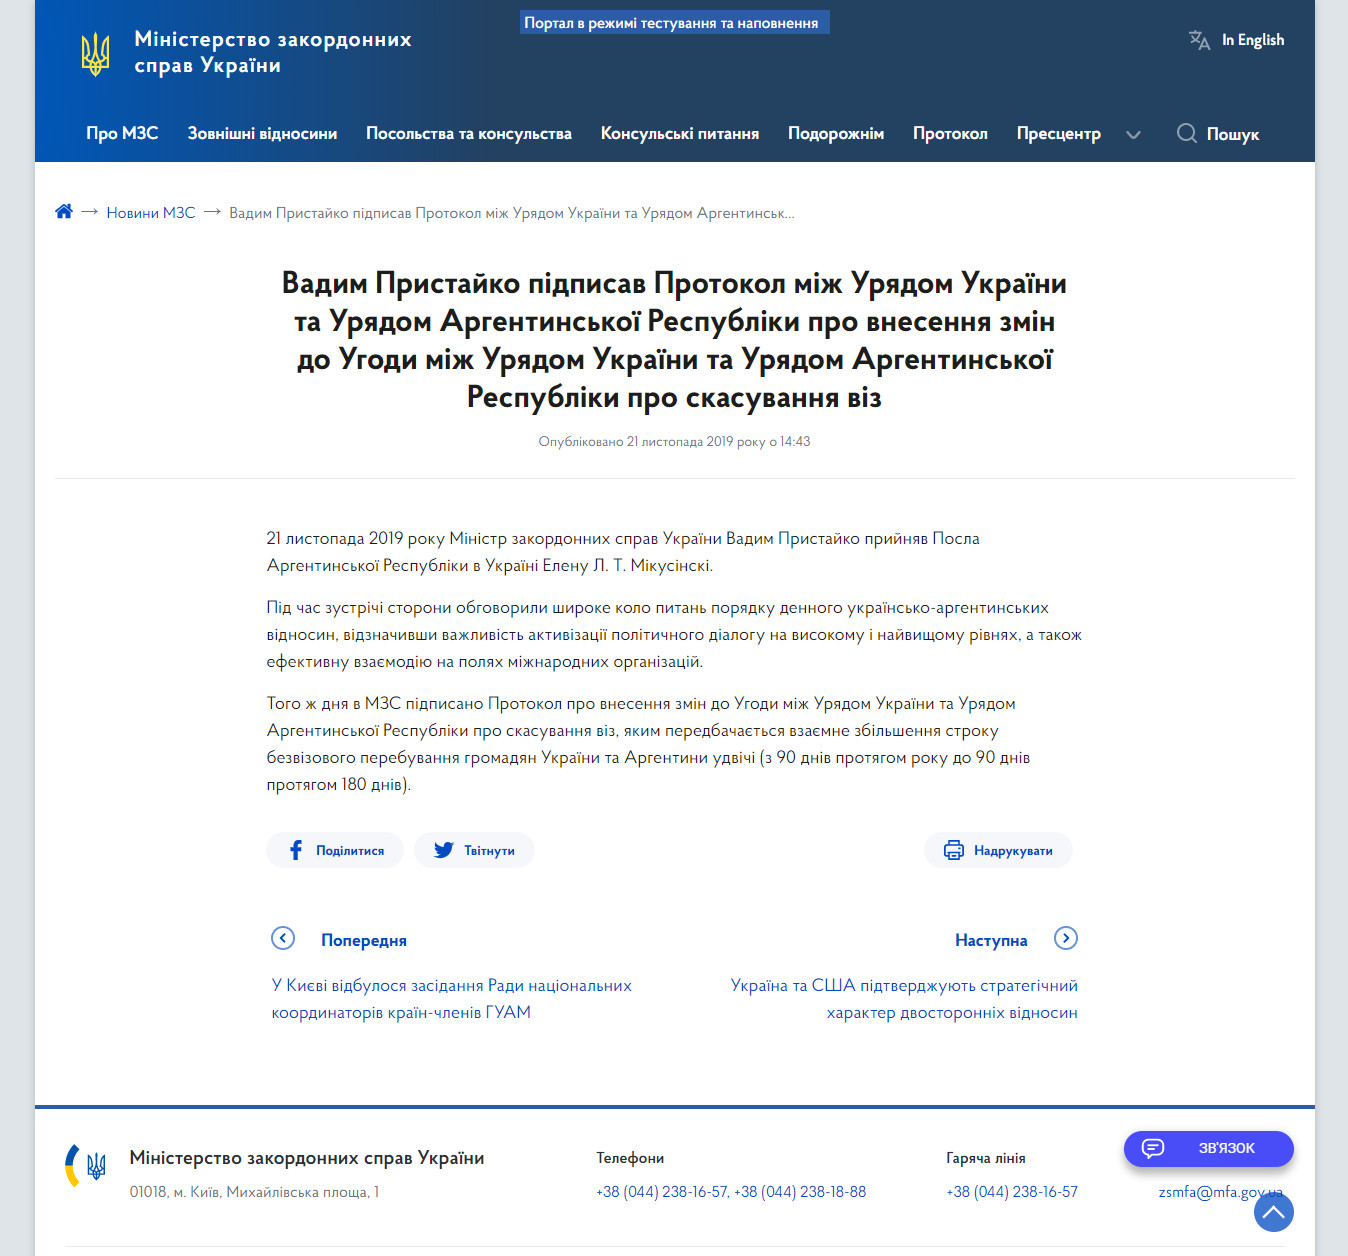 https://mfa.gov.ua/news/76090-vadym-prystaiko-have-signed-the-protocol-between-the-government-of-ukraine-and-the-government-of-the-argentine-republic-on-amendment-of-the-agreement-between-the-government-of-ukraine-a